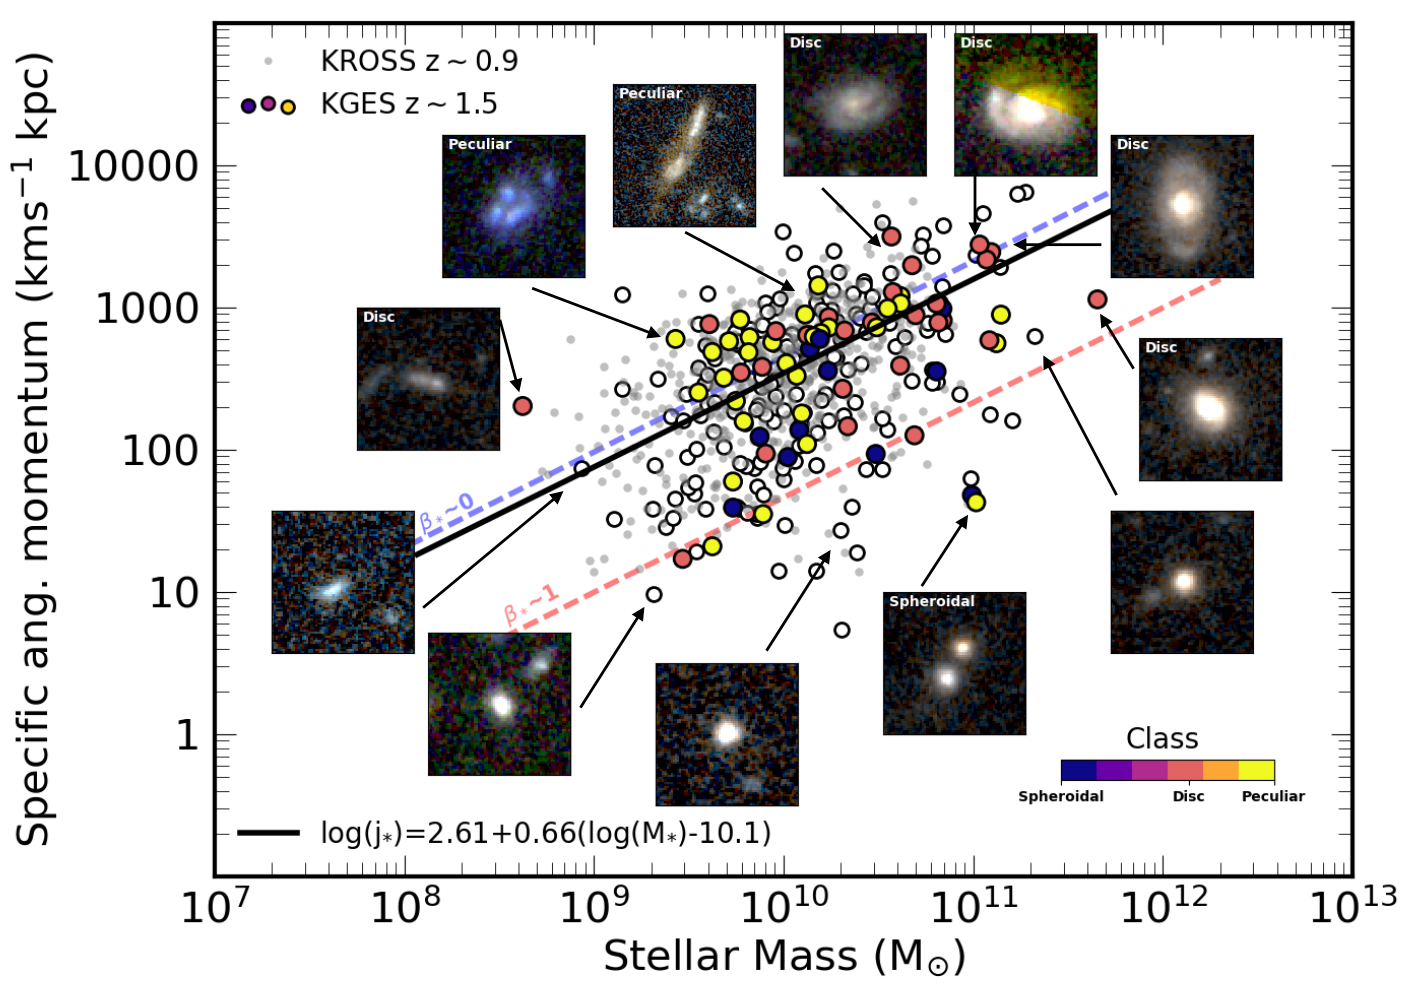 Disks spin faster - measurements of the morphology and
											dynamics of distant galaxies with KMOS